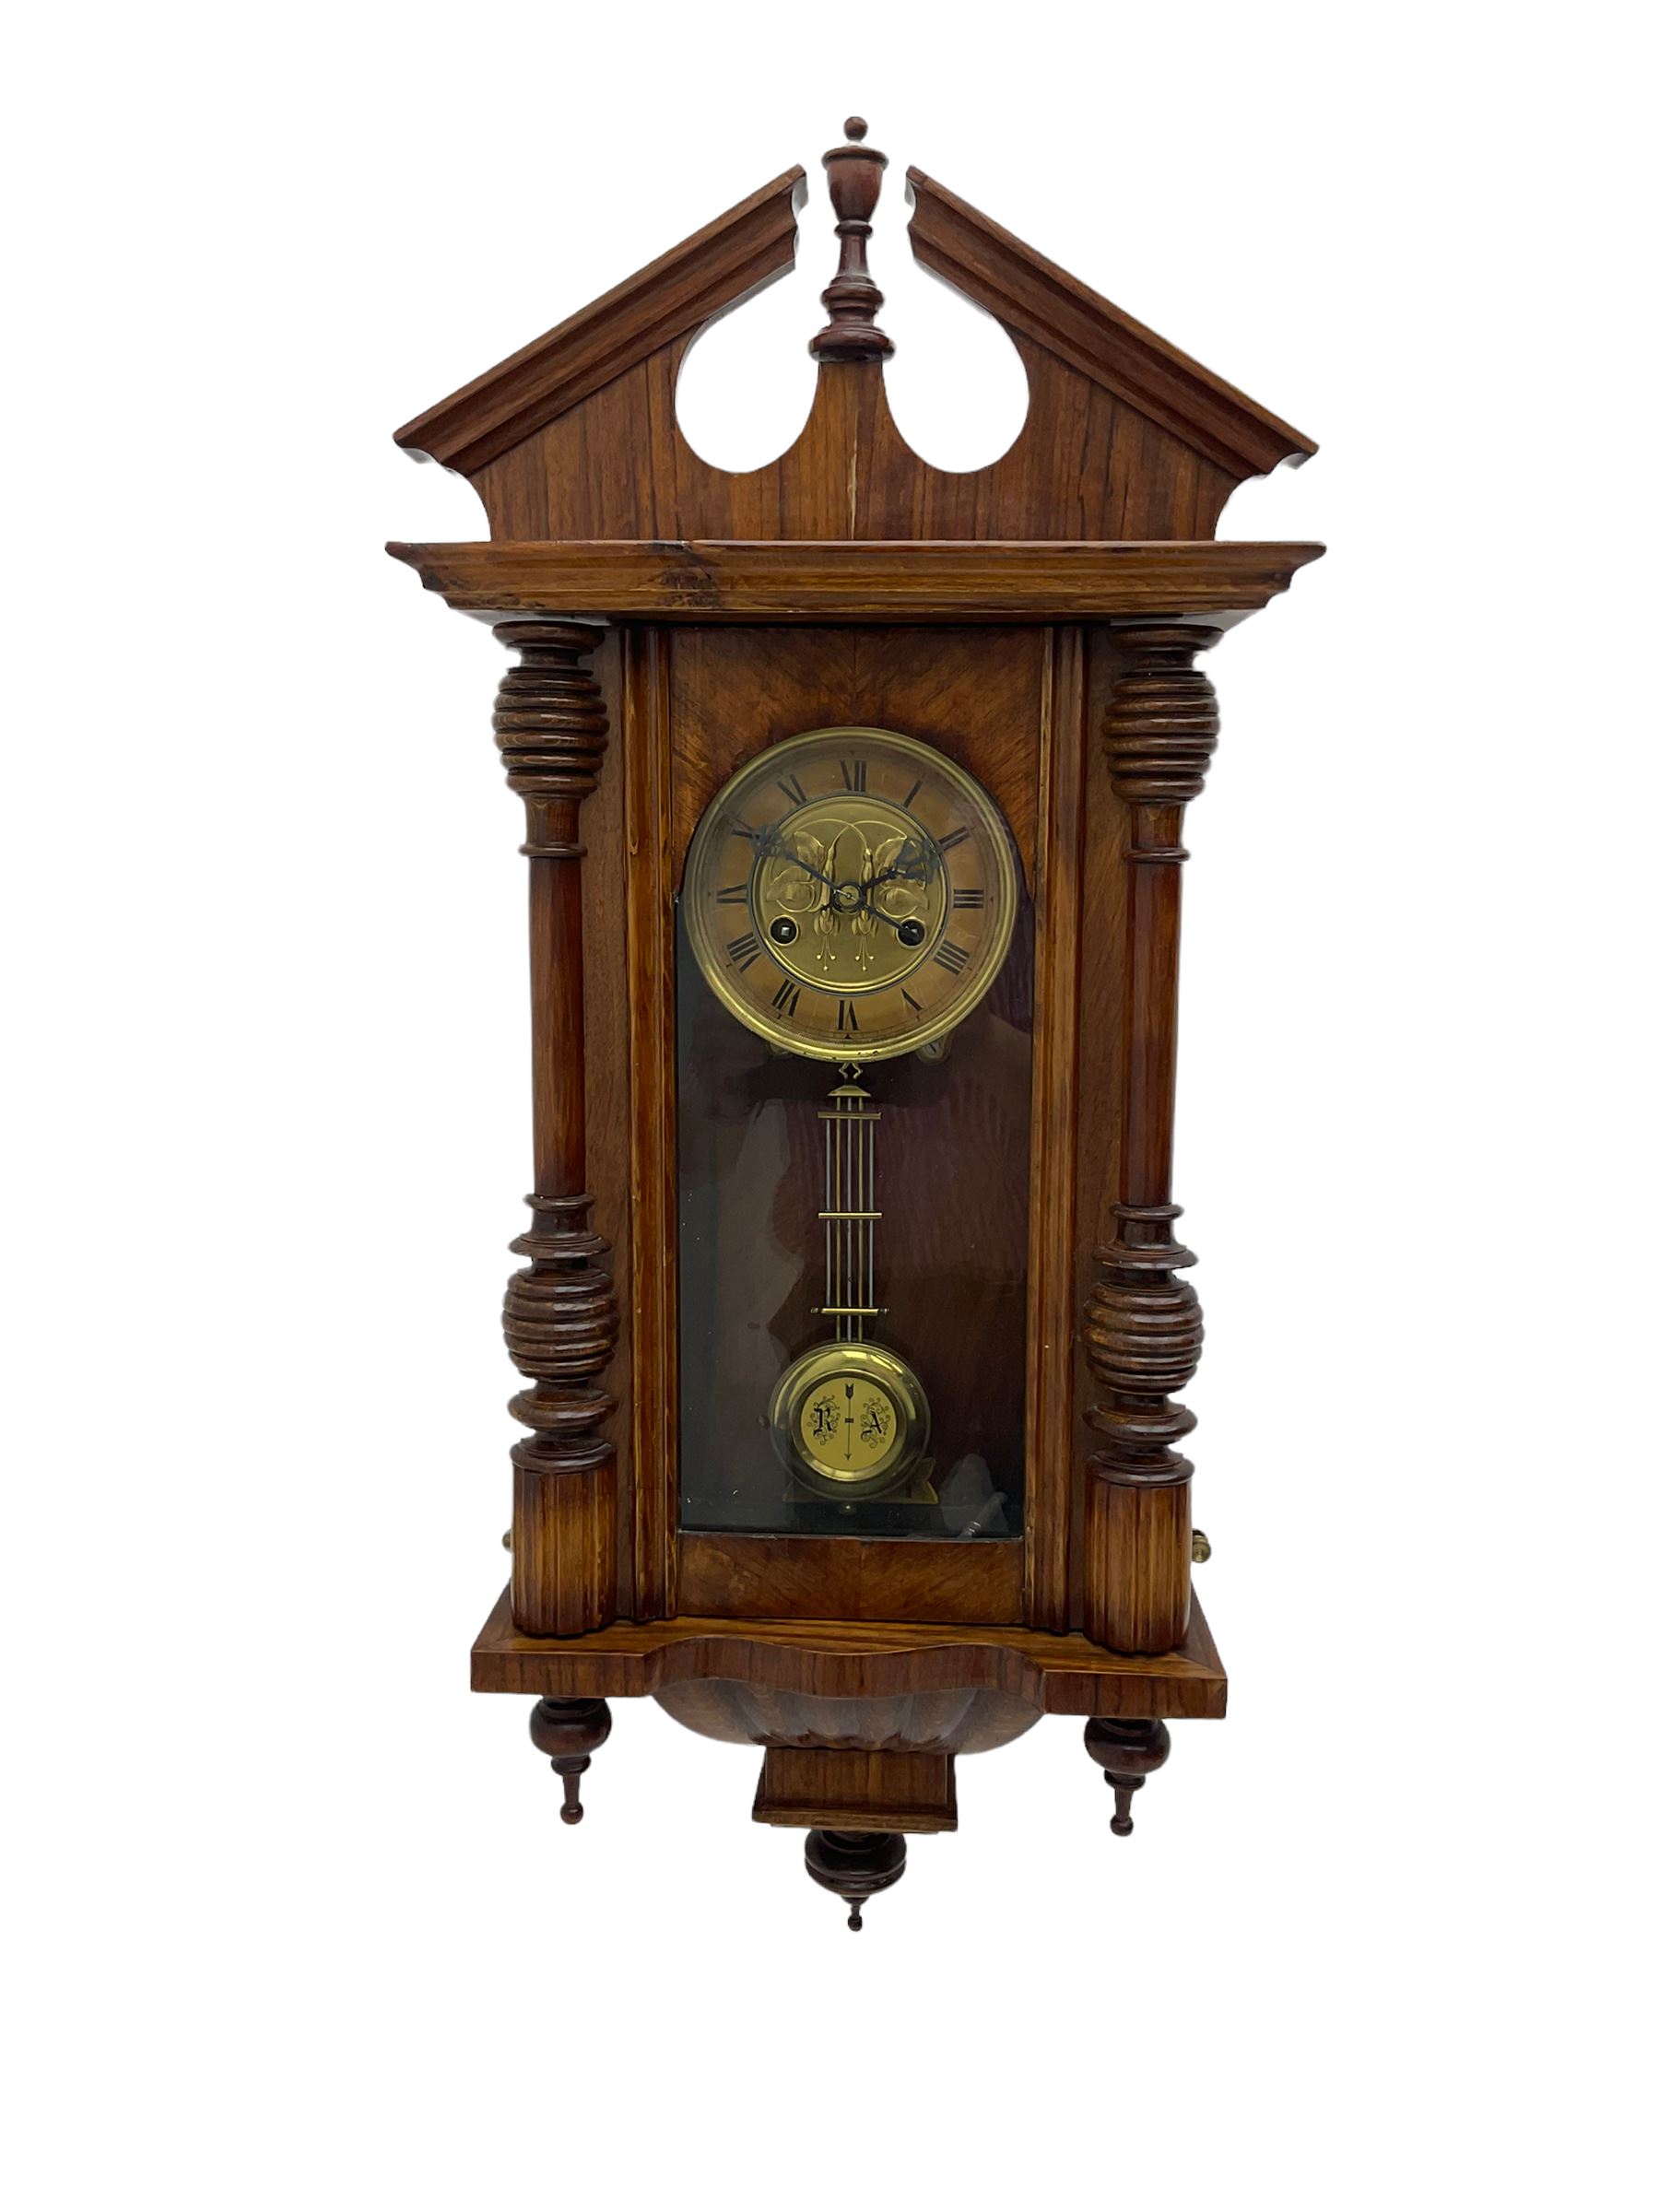 German early 20th century wall clock in a mahogany case with an architectural pediment and turned fi